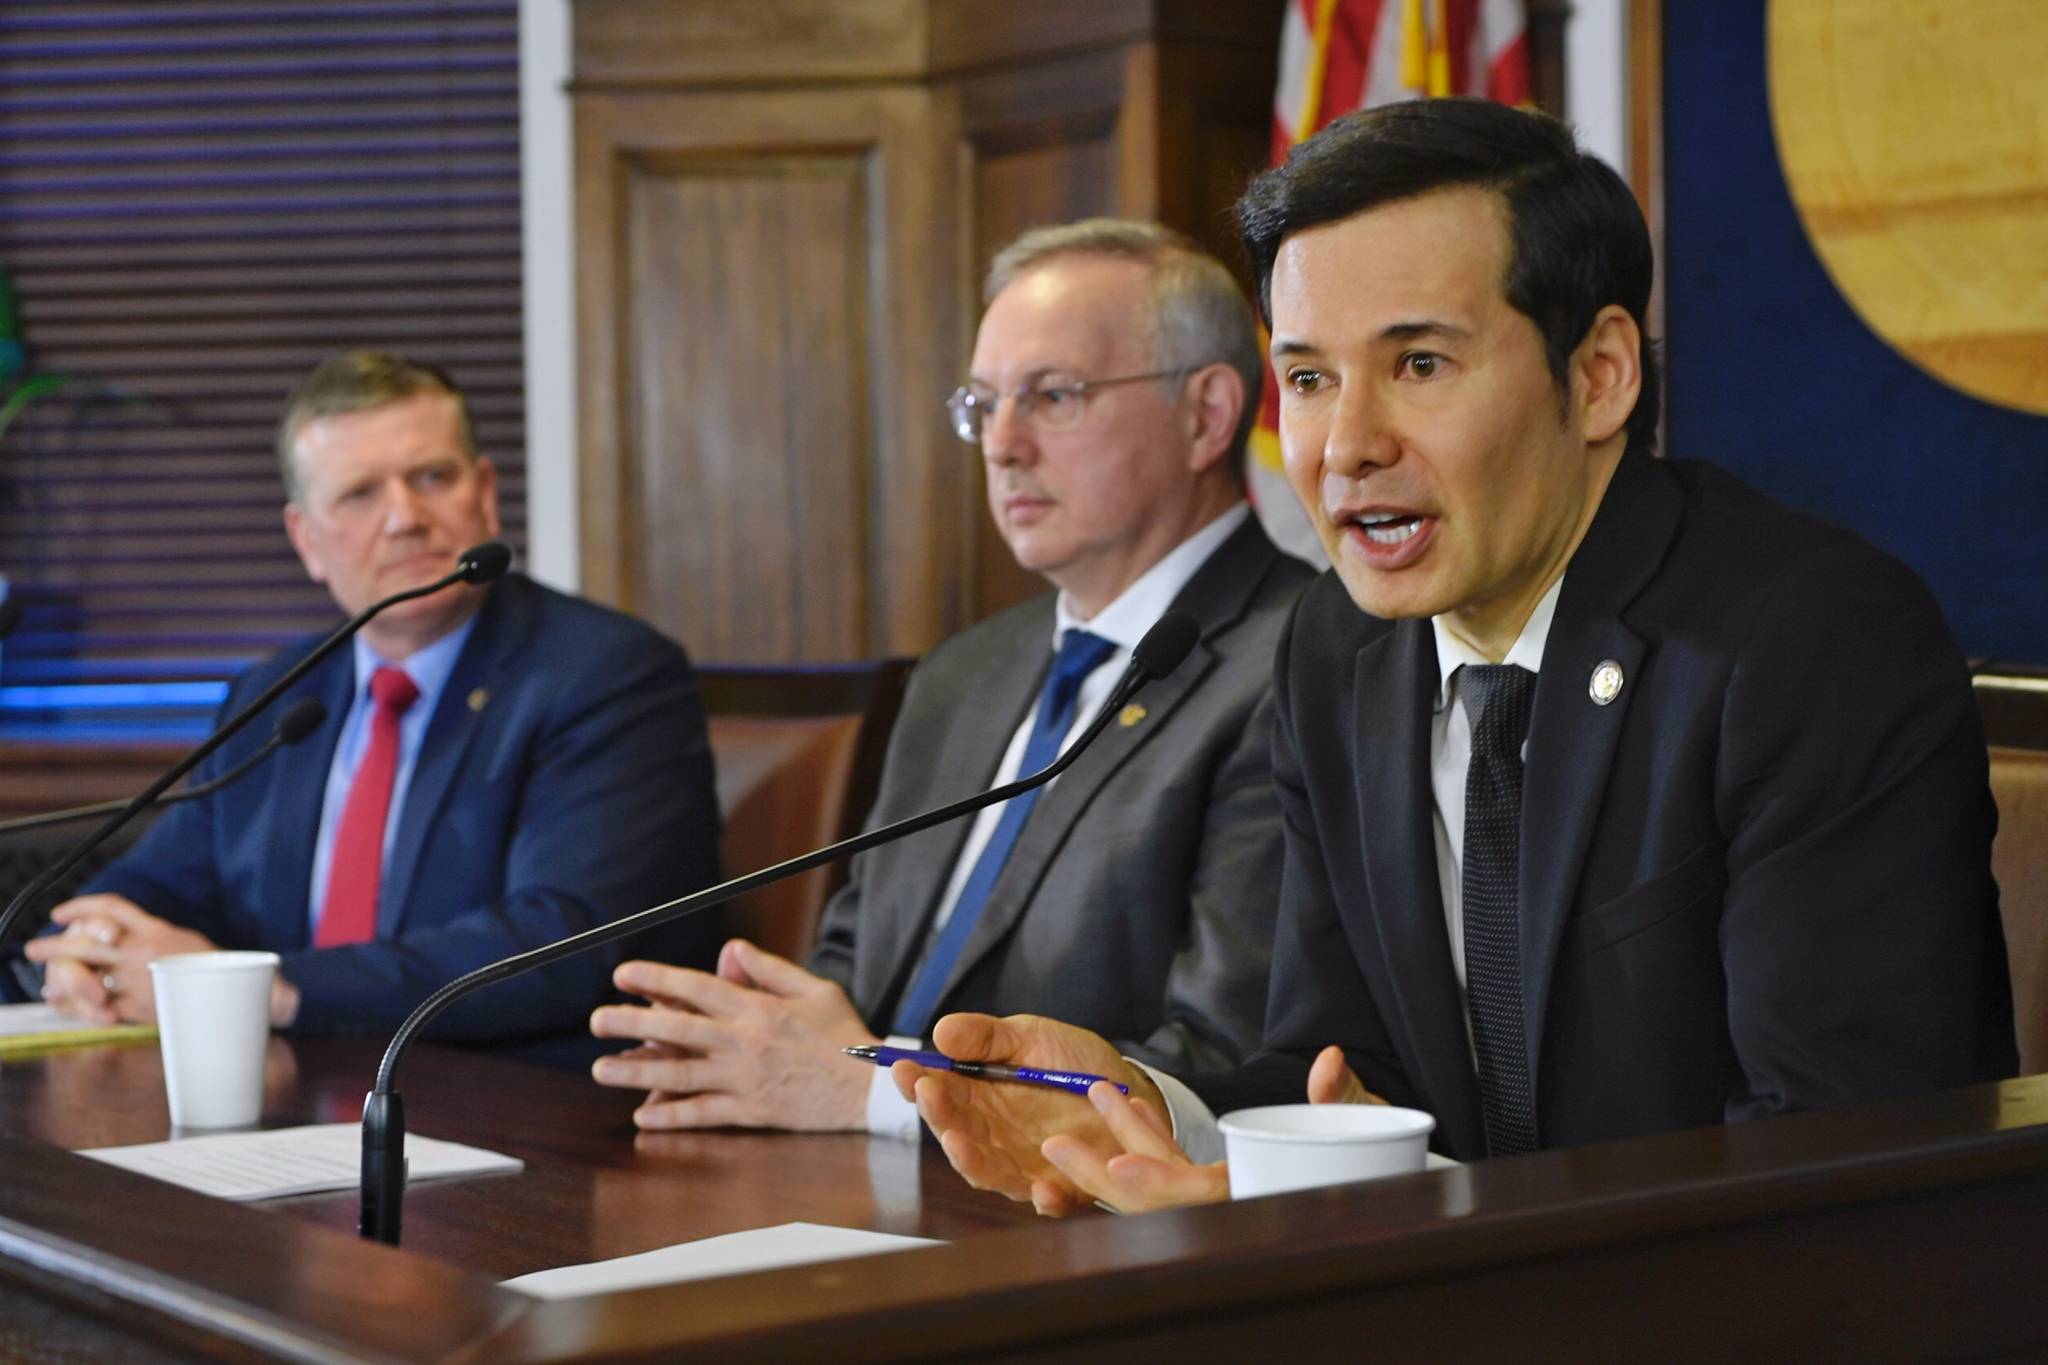 Finance Committee co-chair Rep. Neal Foster, D-Nome, right, speaks during a House Majority press conference at the Capitol on Thursday, March 28, 2019. Also shown are Speaker of the House Bryce Edgmon, I-Dillingham, center, and Rep. Chuck Kopp, R-Anchorage, Chair of the Rules Committee. (Michael Penn | Juneau Empire)